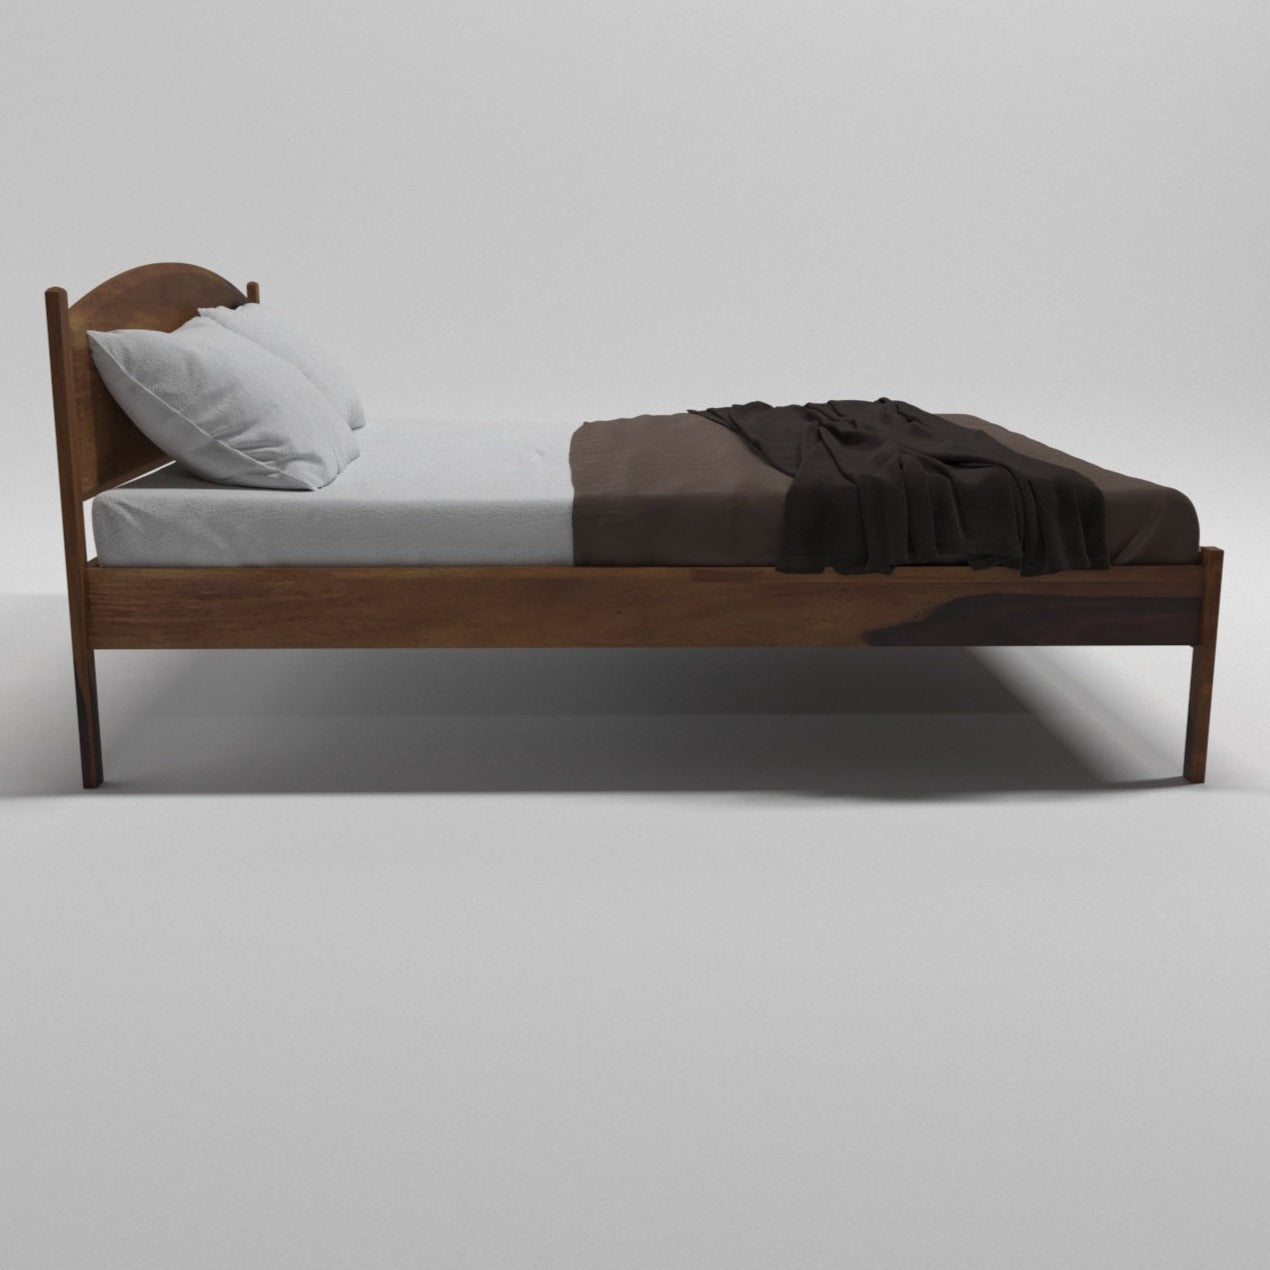 Wooden Arch Head Bed Bed